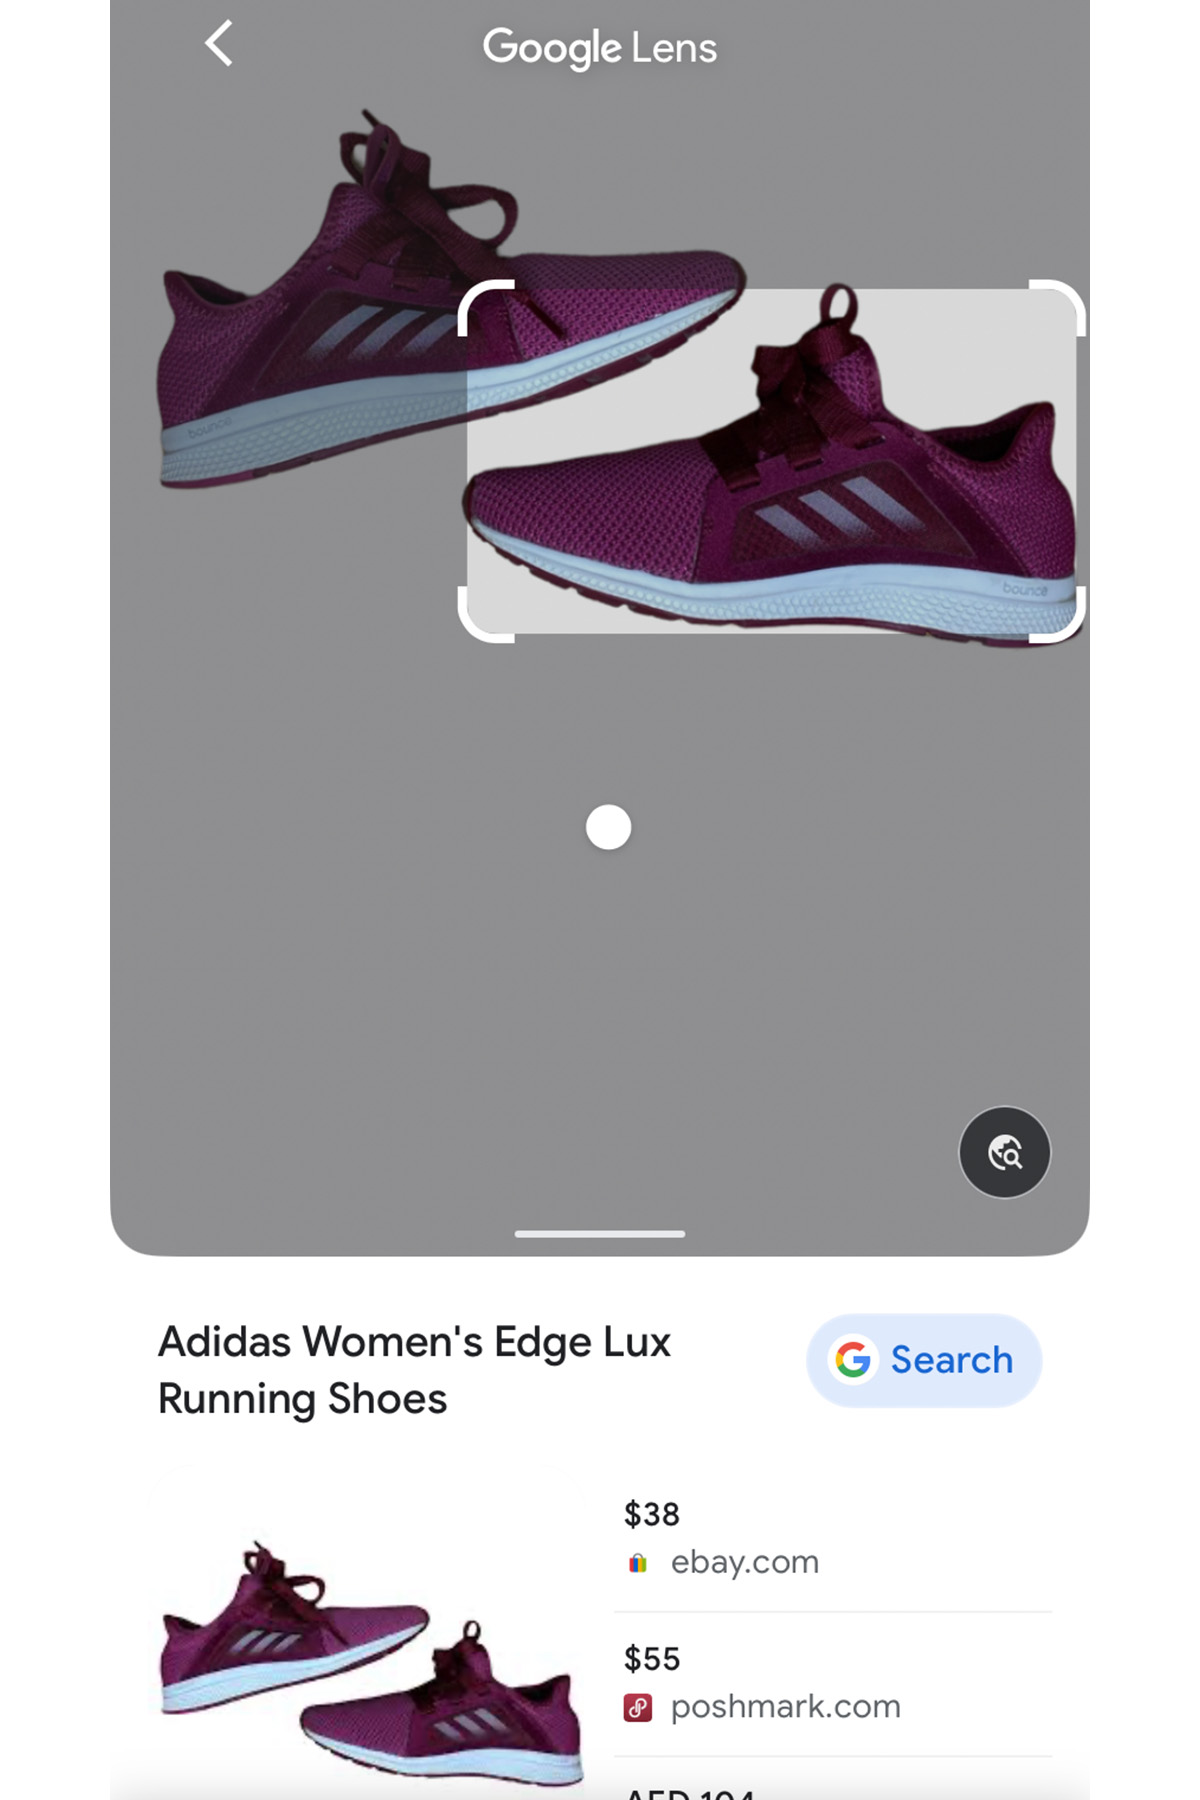 screenshot of a google image search for a pair of adidas shoes.